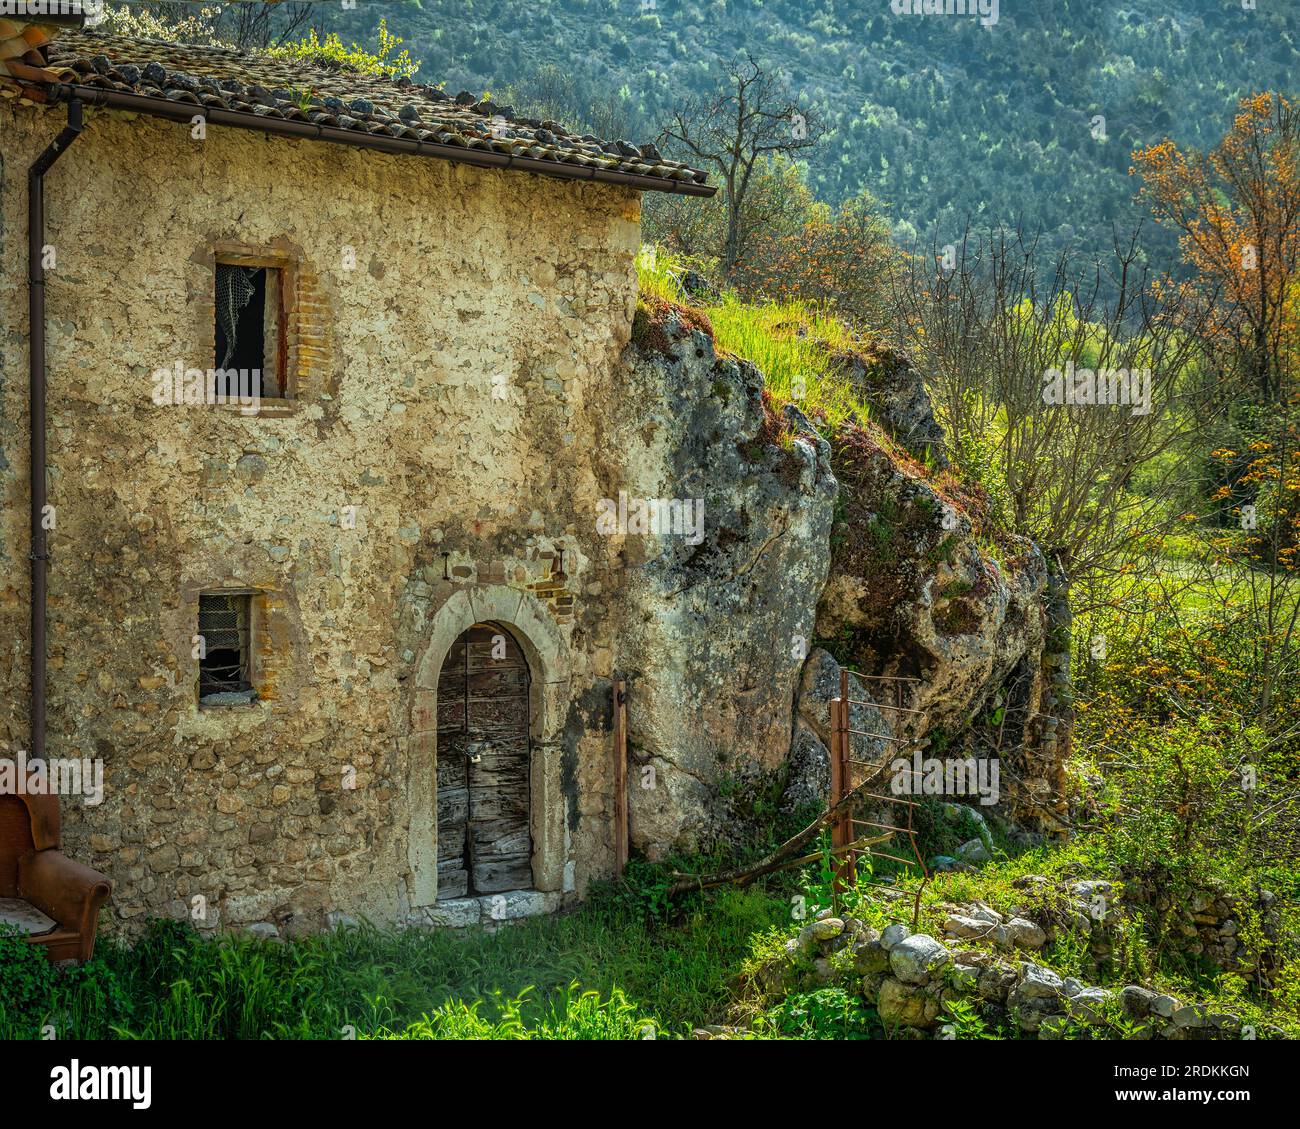 ancient rural stone house leaning against a boulder Stock Photo